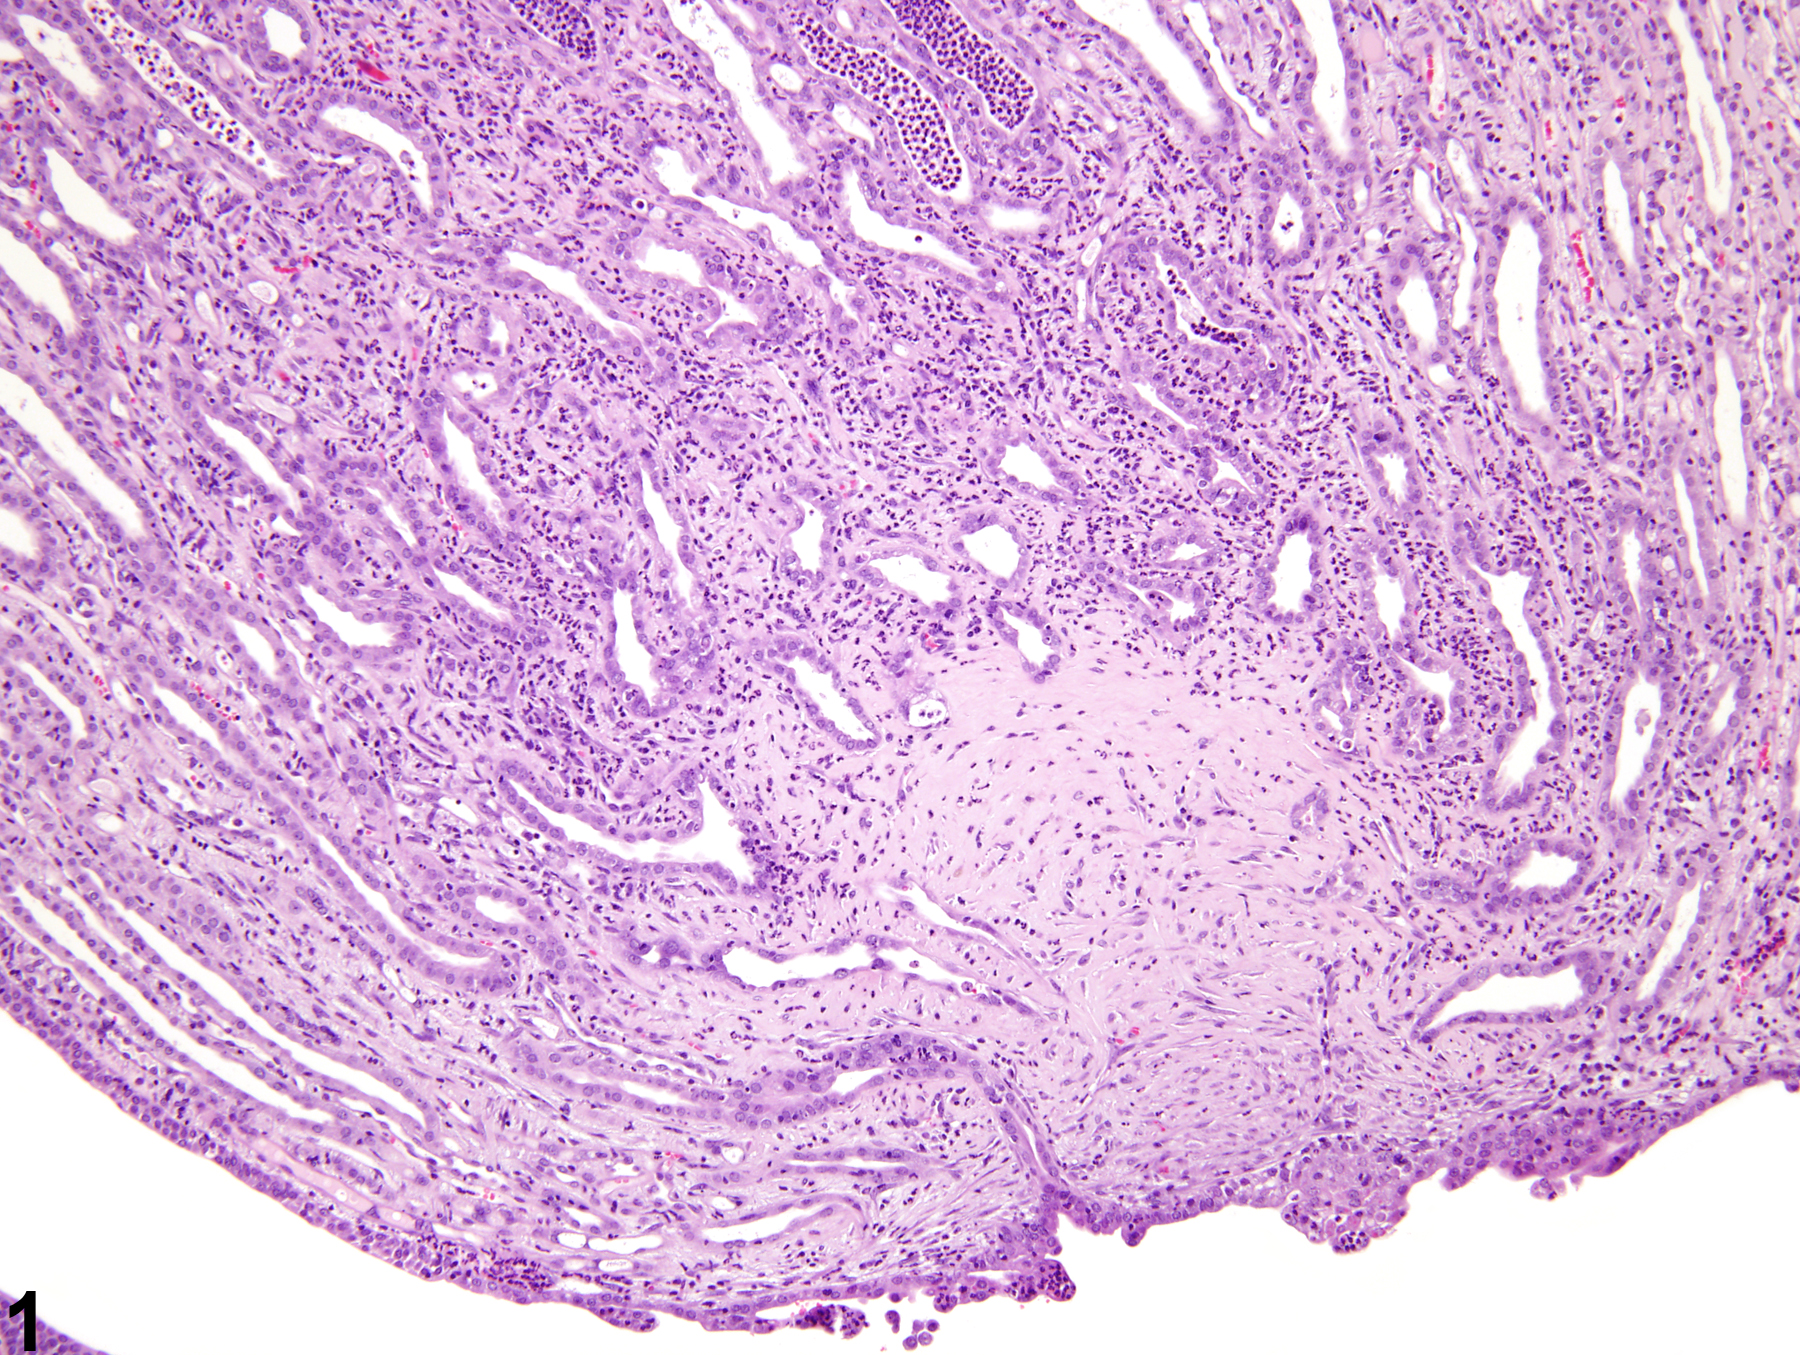 Image of fibrosis in the kidney from a female F344/N rat in a chronic study